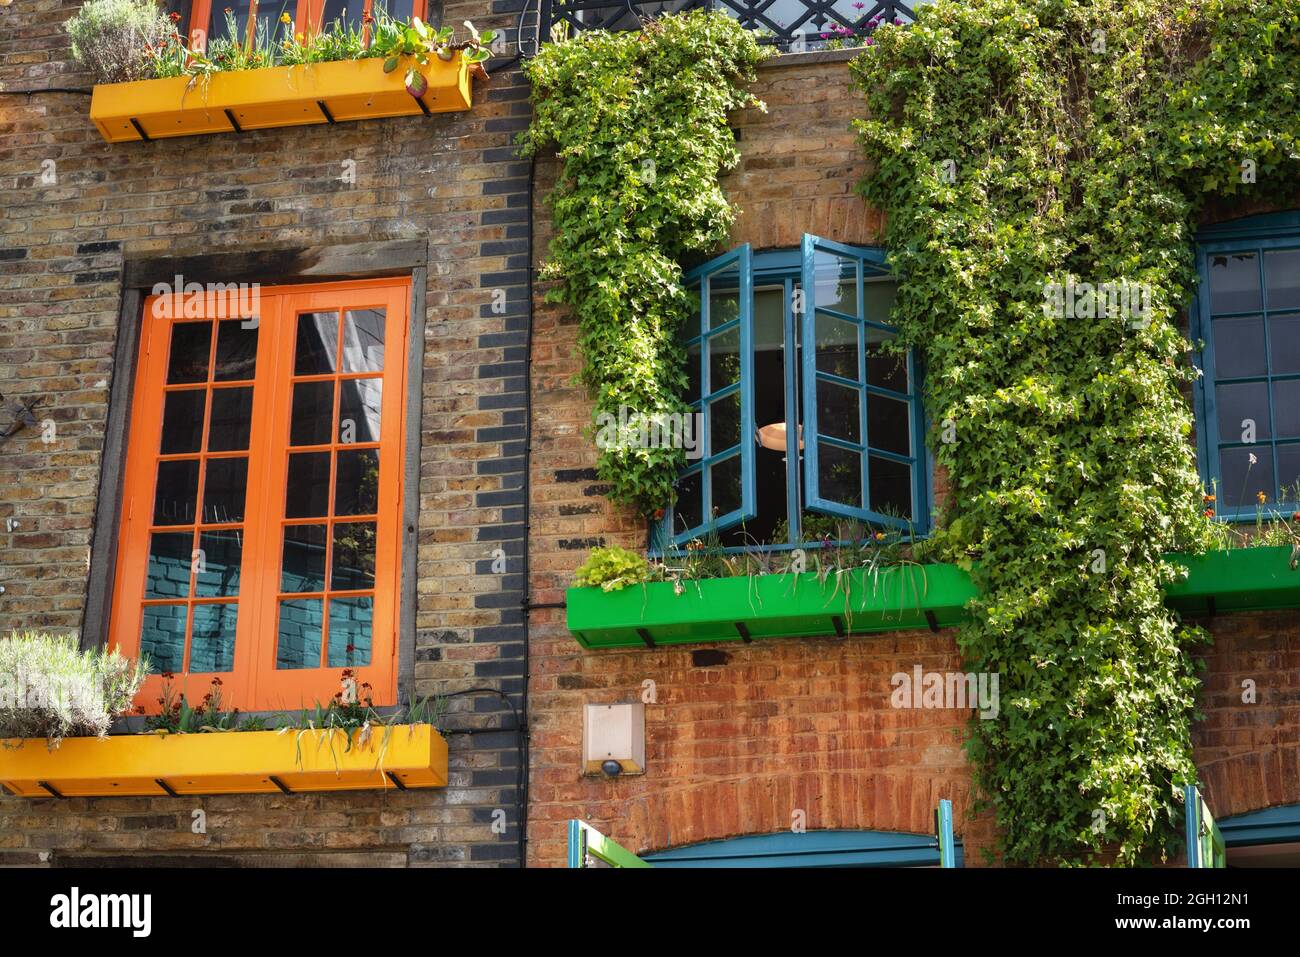 facade detail in Covent Garden with colorful houses. It contains several health food cafes and values driven retailers. Stock Photo